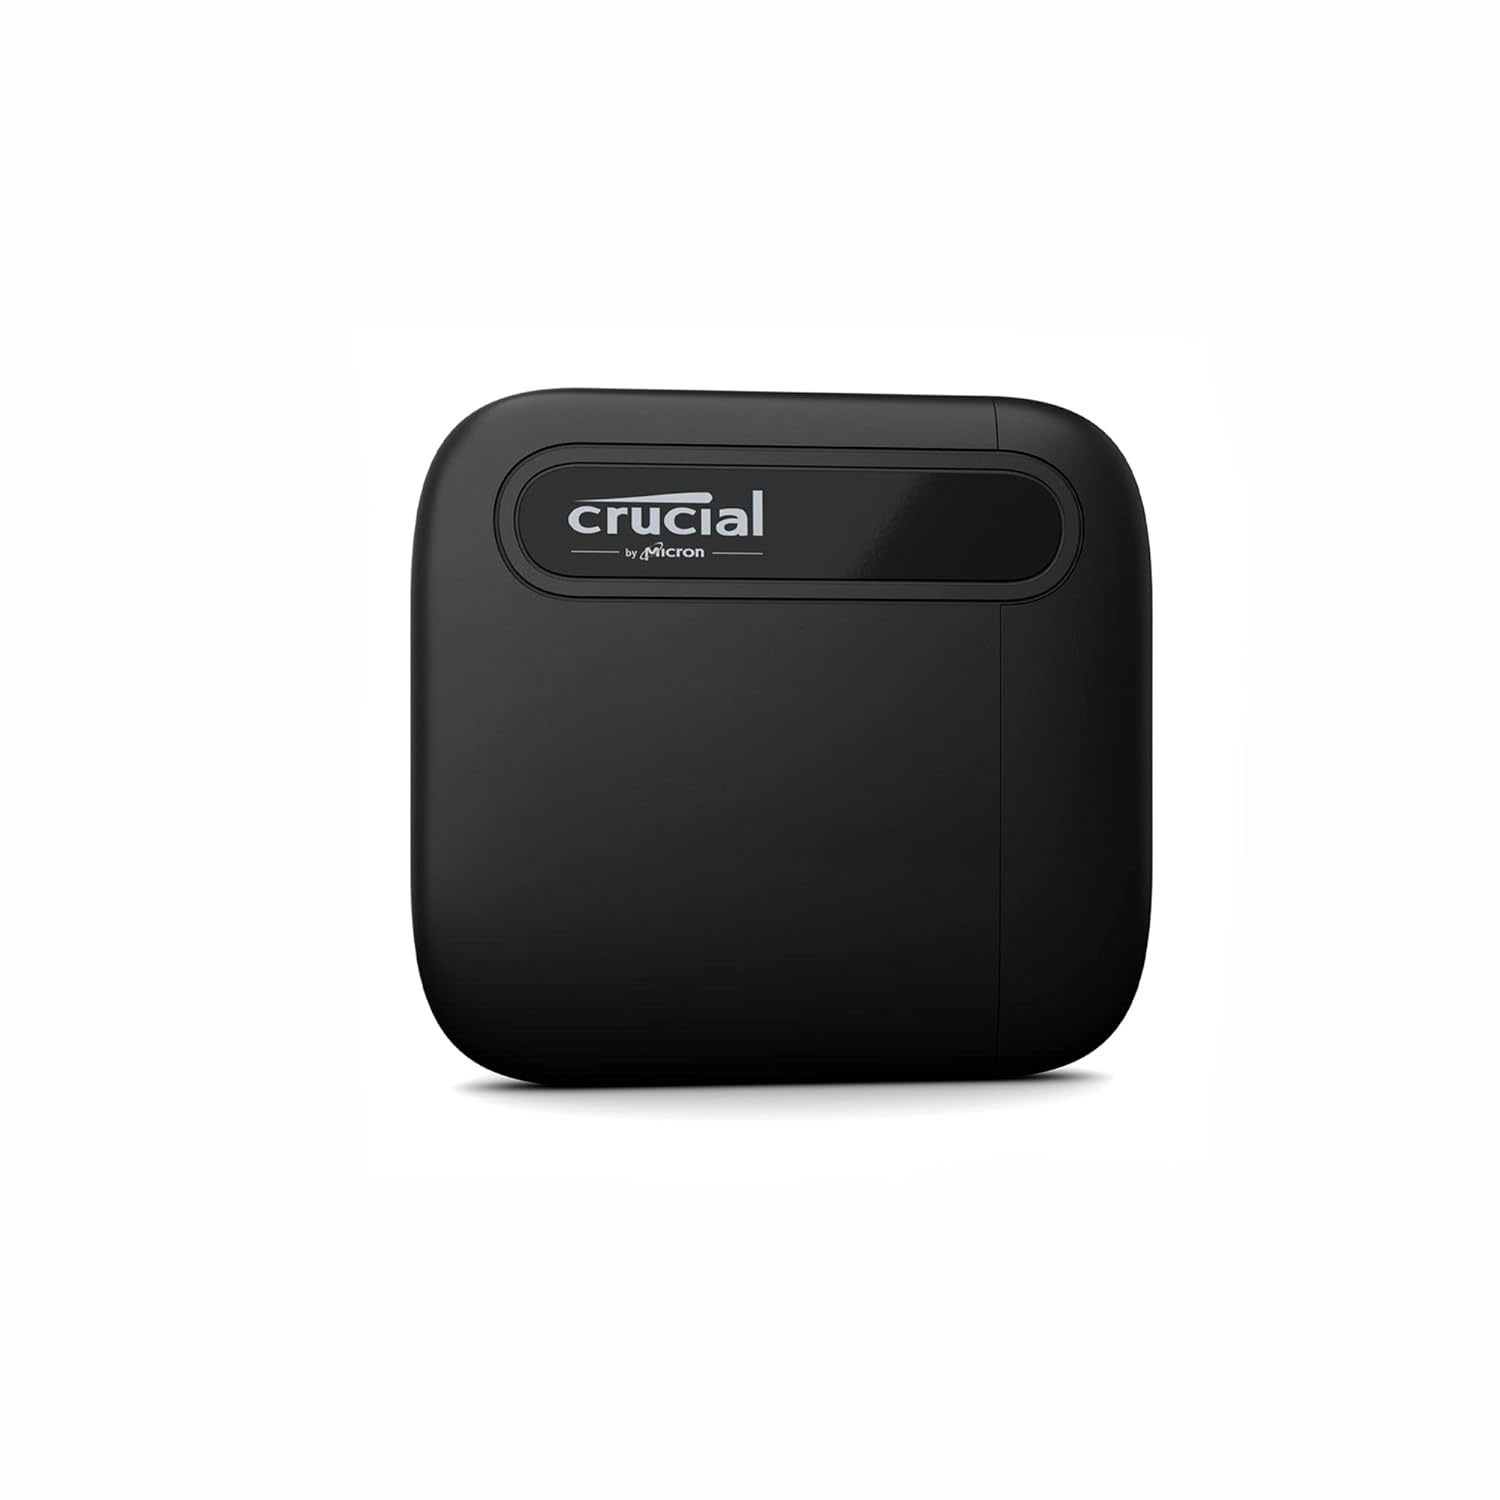 Primary image for Crucial X6 1TB Portable SSD  Up to 800MB/s  USB 3.2  External Solid State Drive,